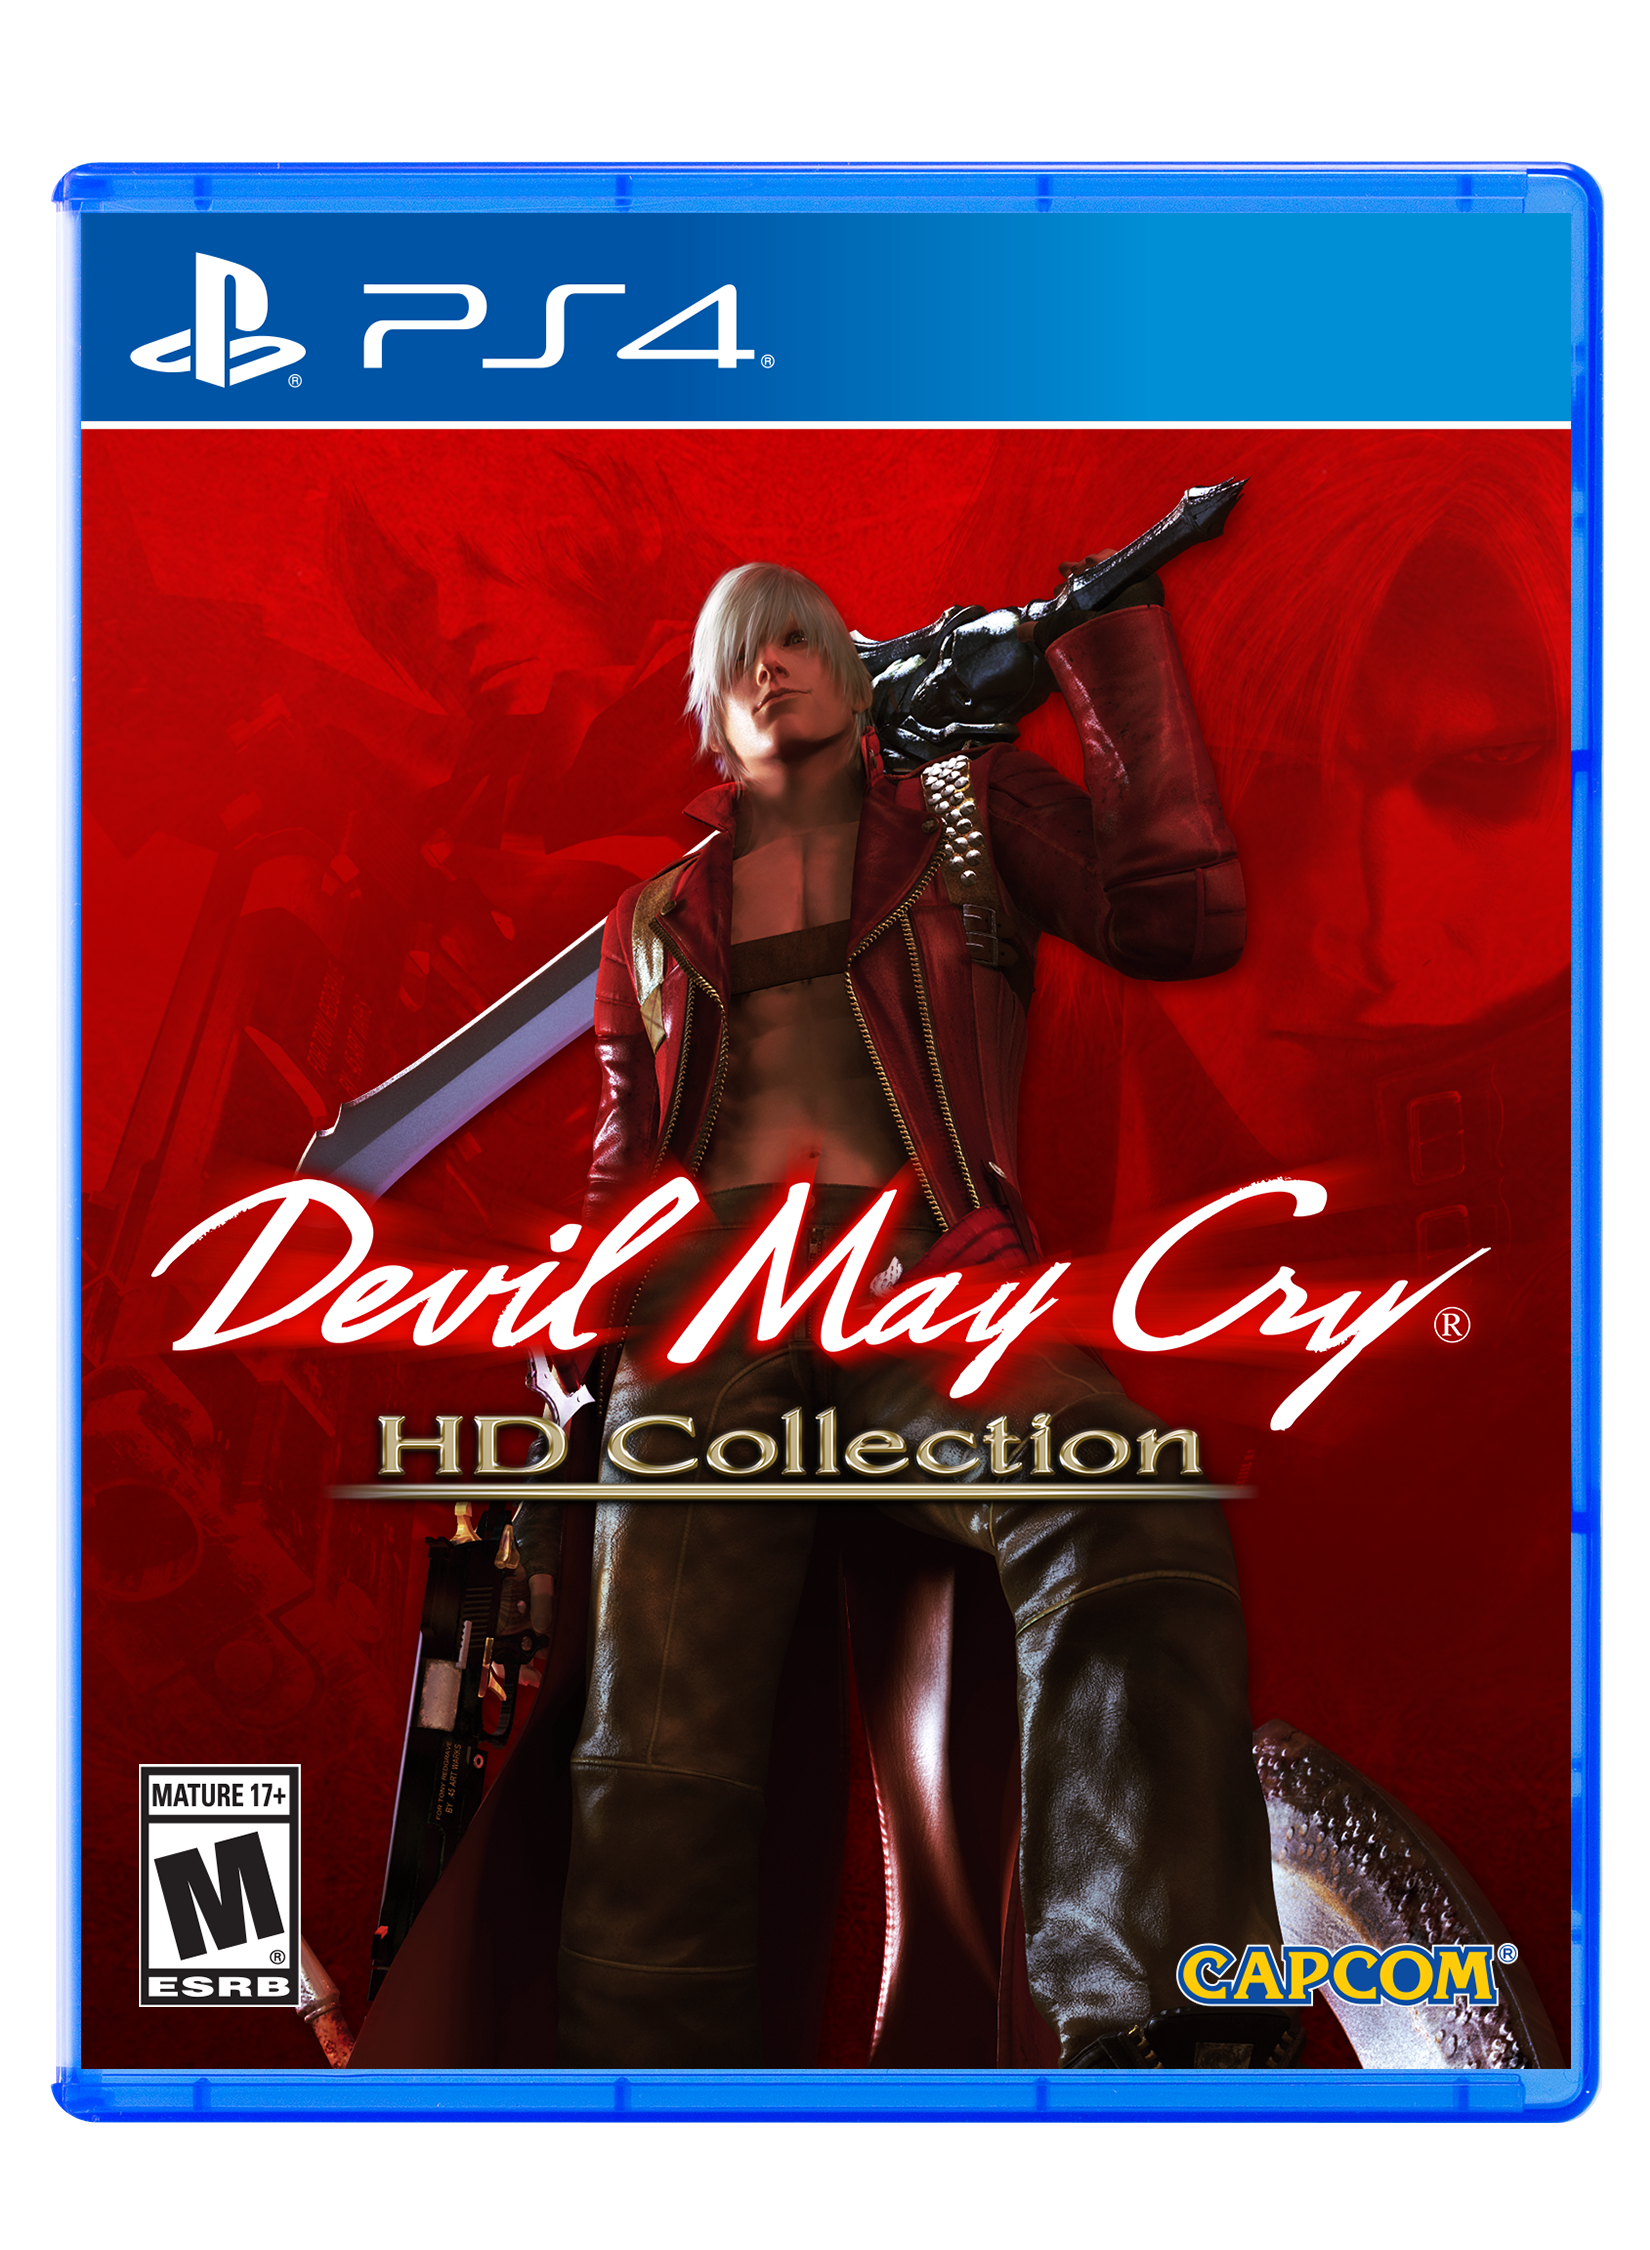 Devil May Cry 5】Dante Moveset Showcase All Weapons, Styles